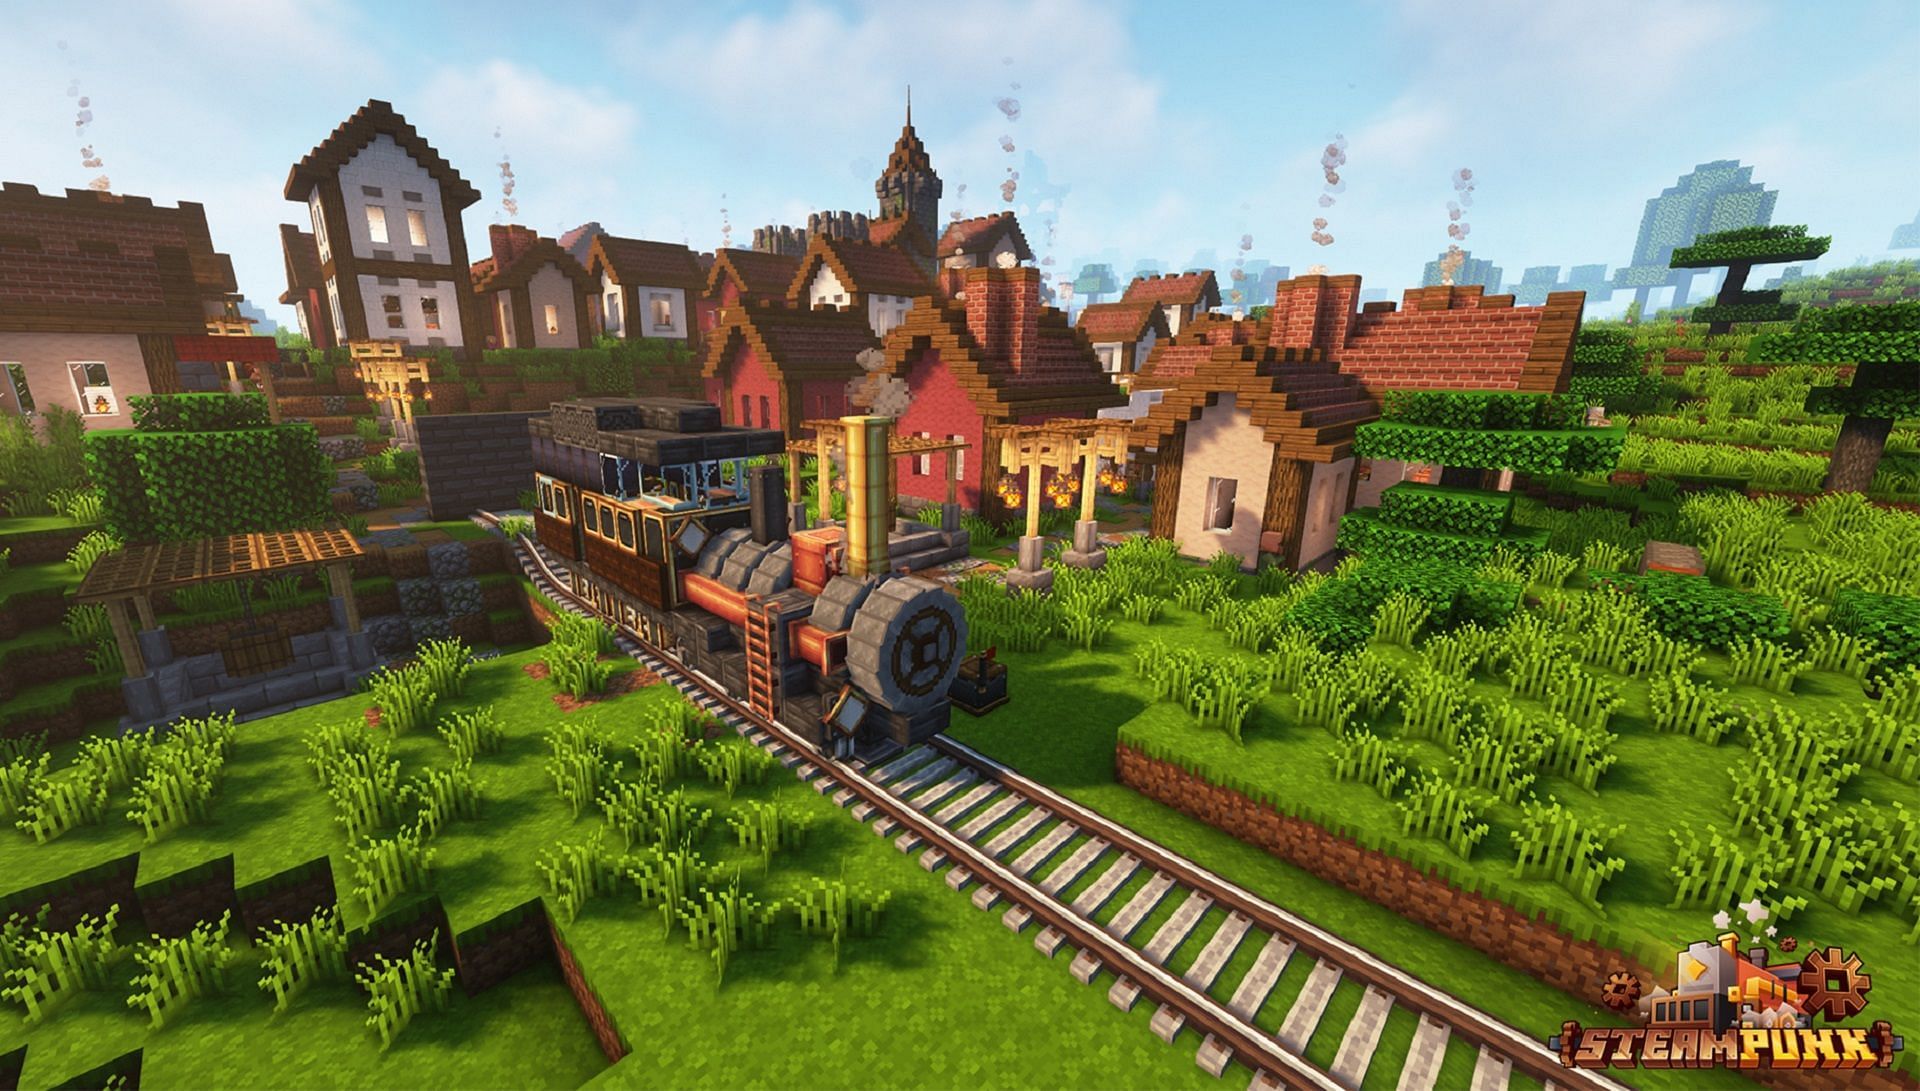 SteamPunk uses many of the same Minecraft mods in Dreamcraft but in a world of cogs, gears, and machinery (Image via SHXRKIE/CurseForge)